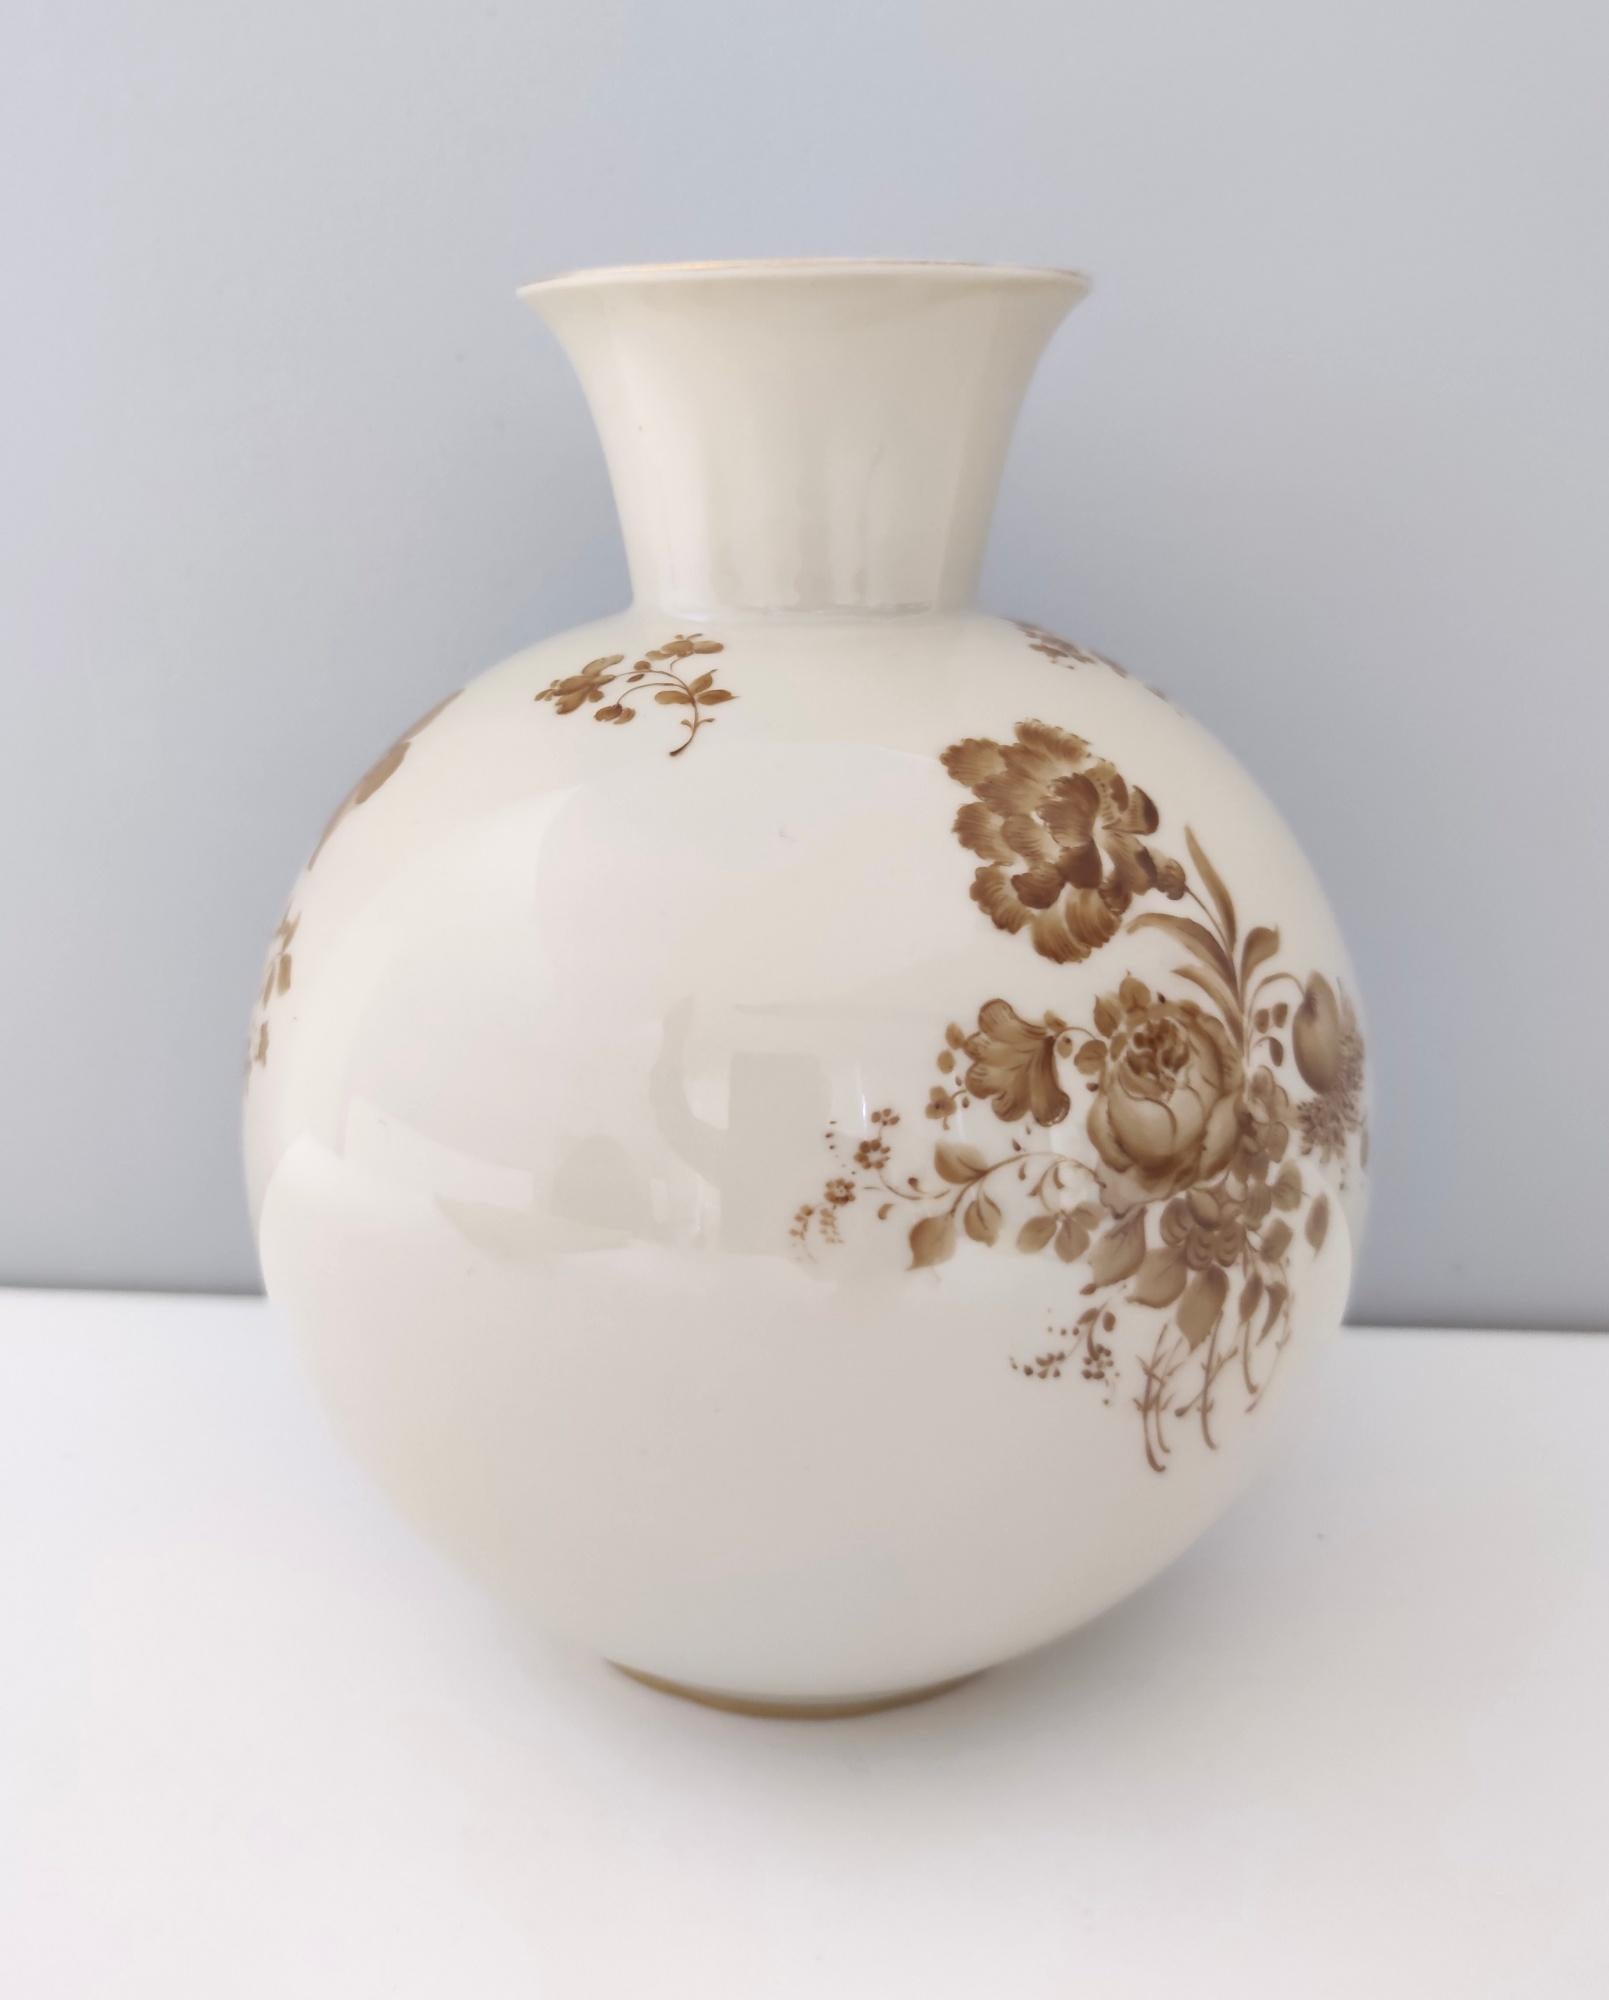 Vintage Ivory Ceramic Vase with Brown Floral Details by Rosenthal, Italy In Excellent Condition For Sale In Bresso, Lombardy